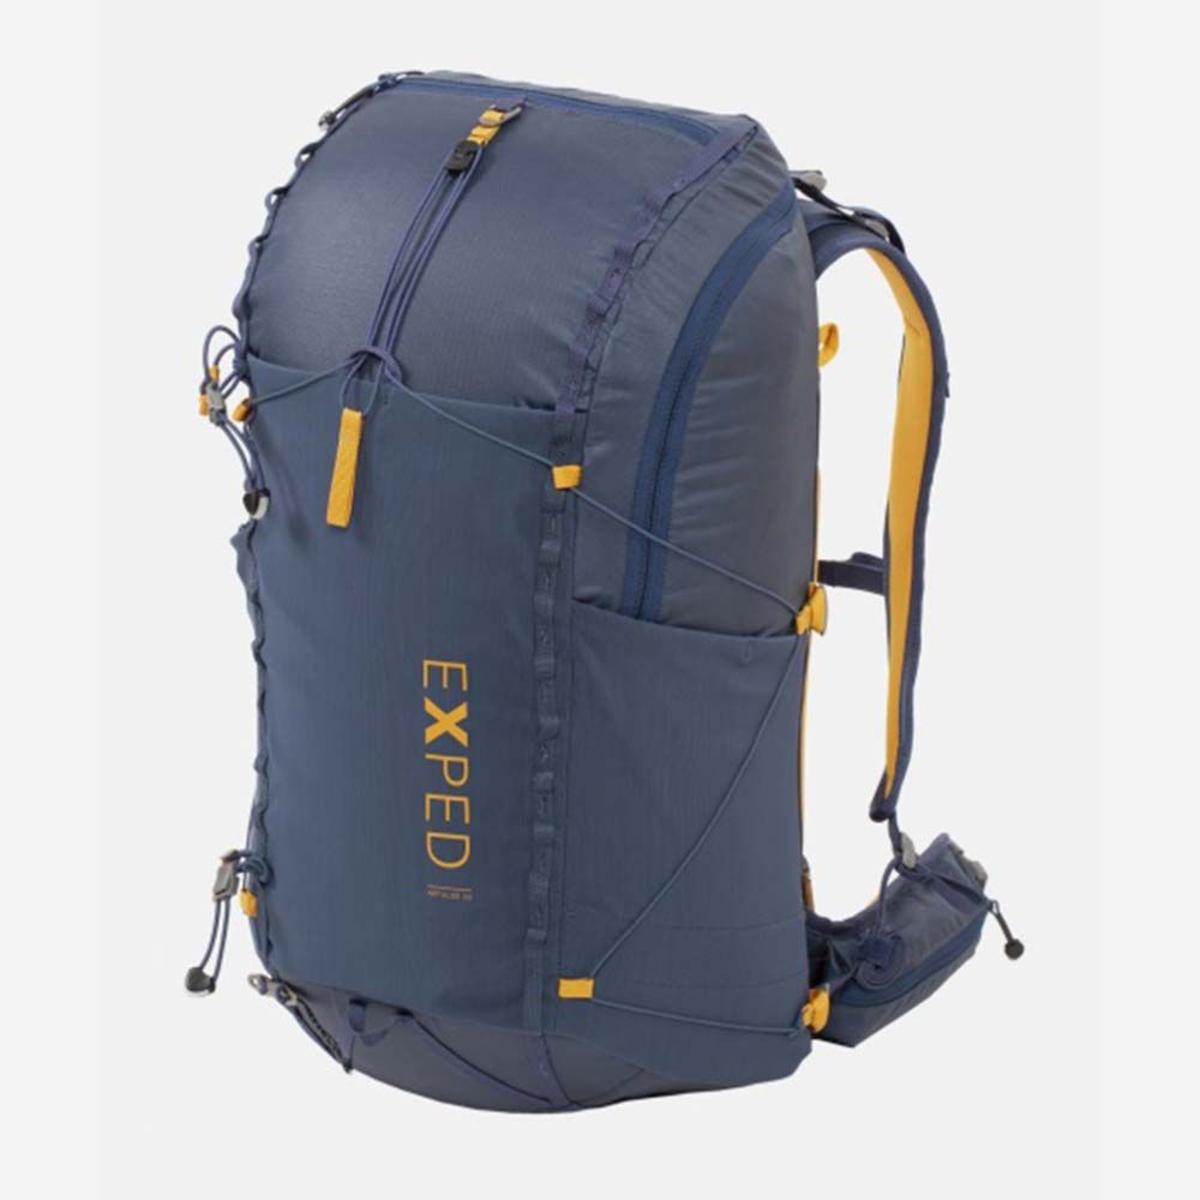 Exped Impulse 30L Hiking Backpack - Navy